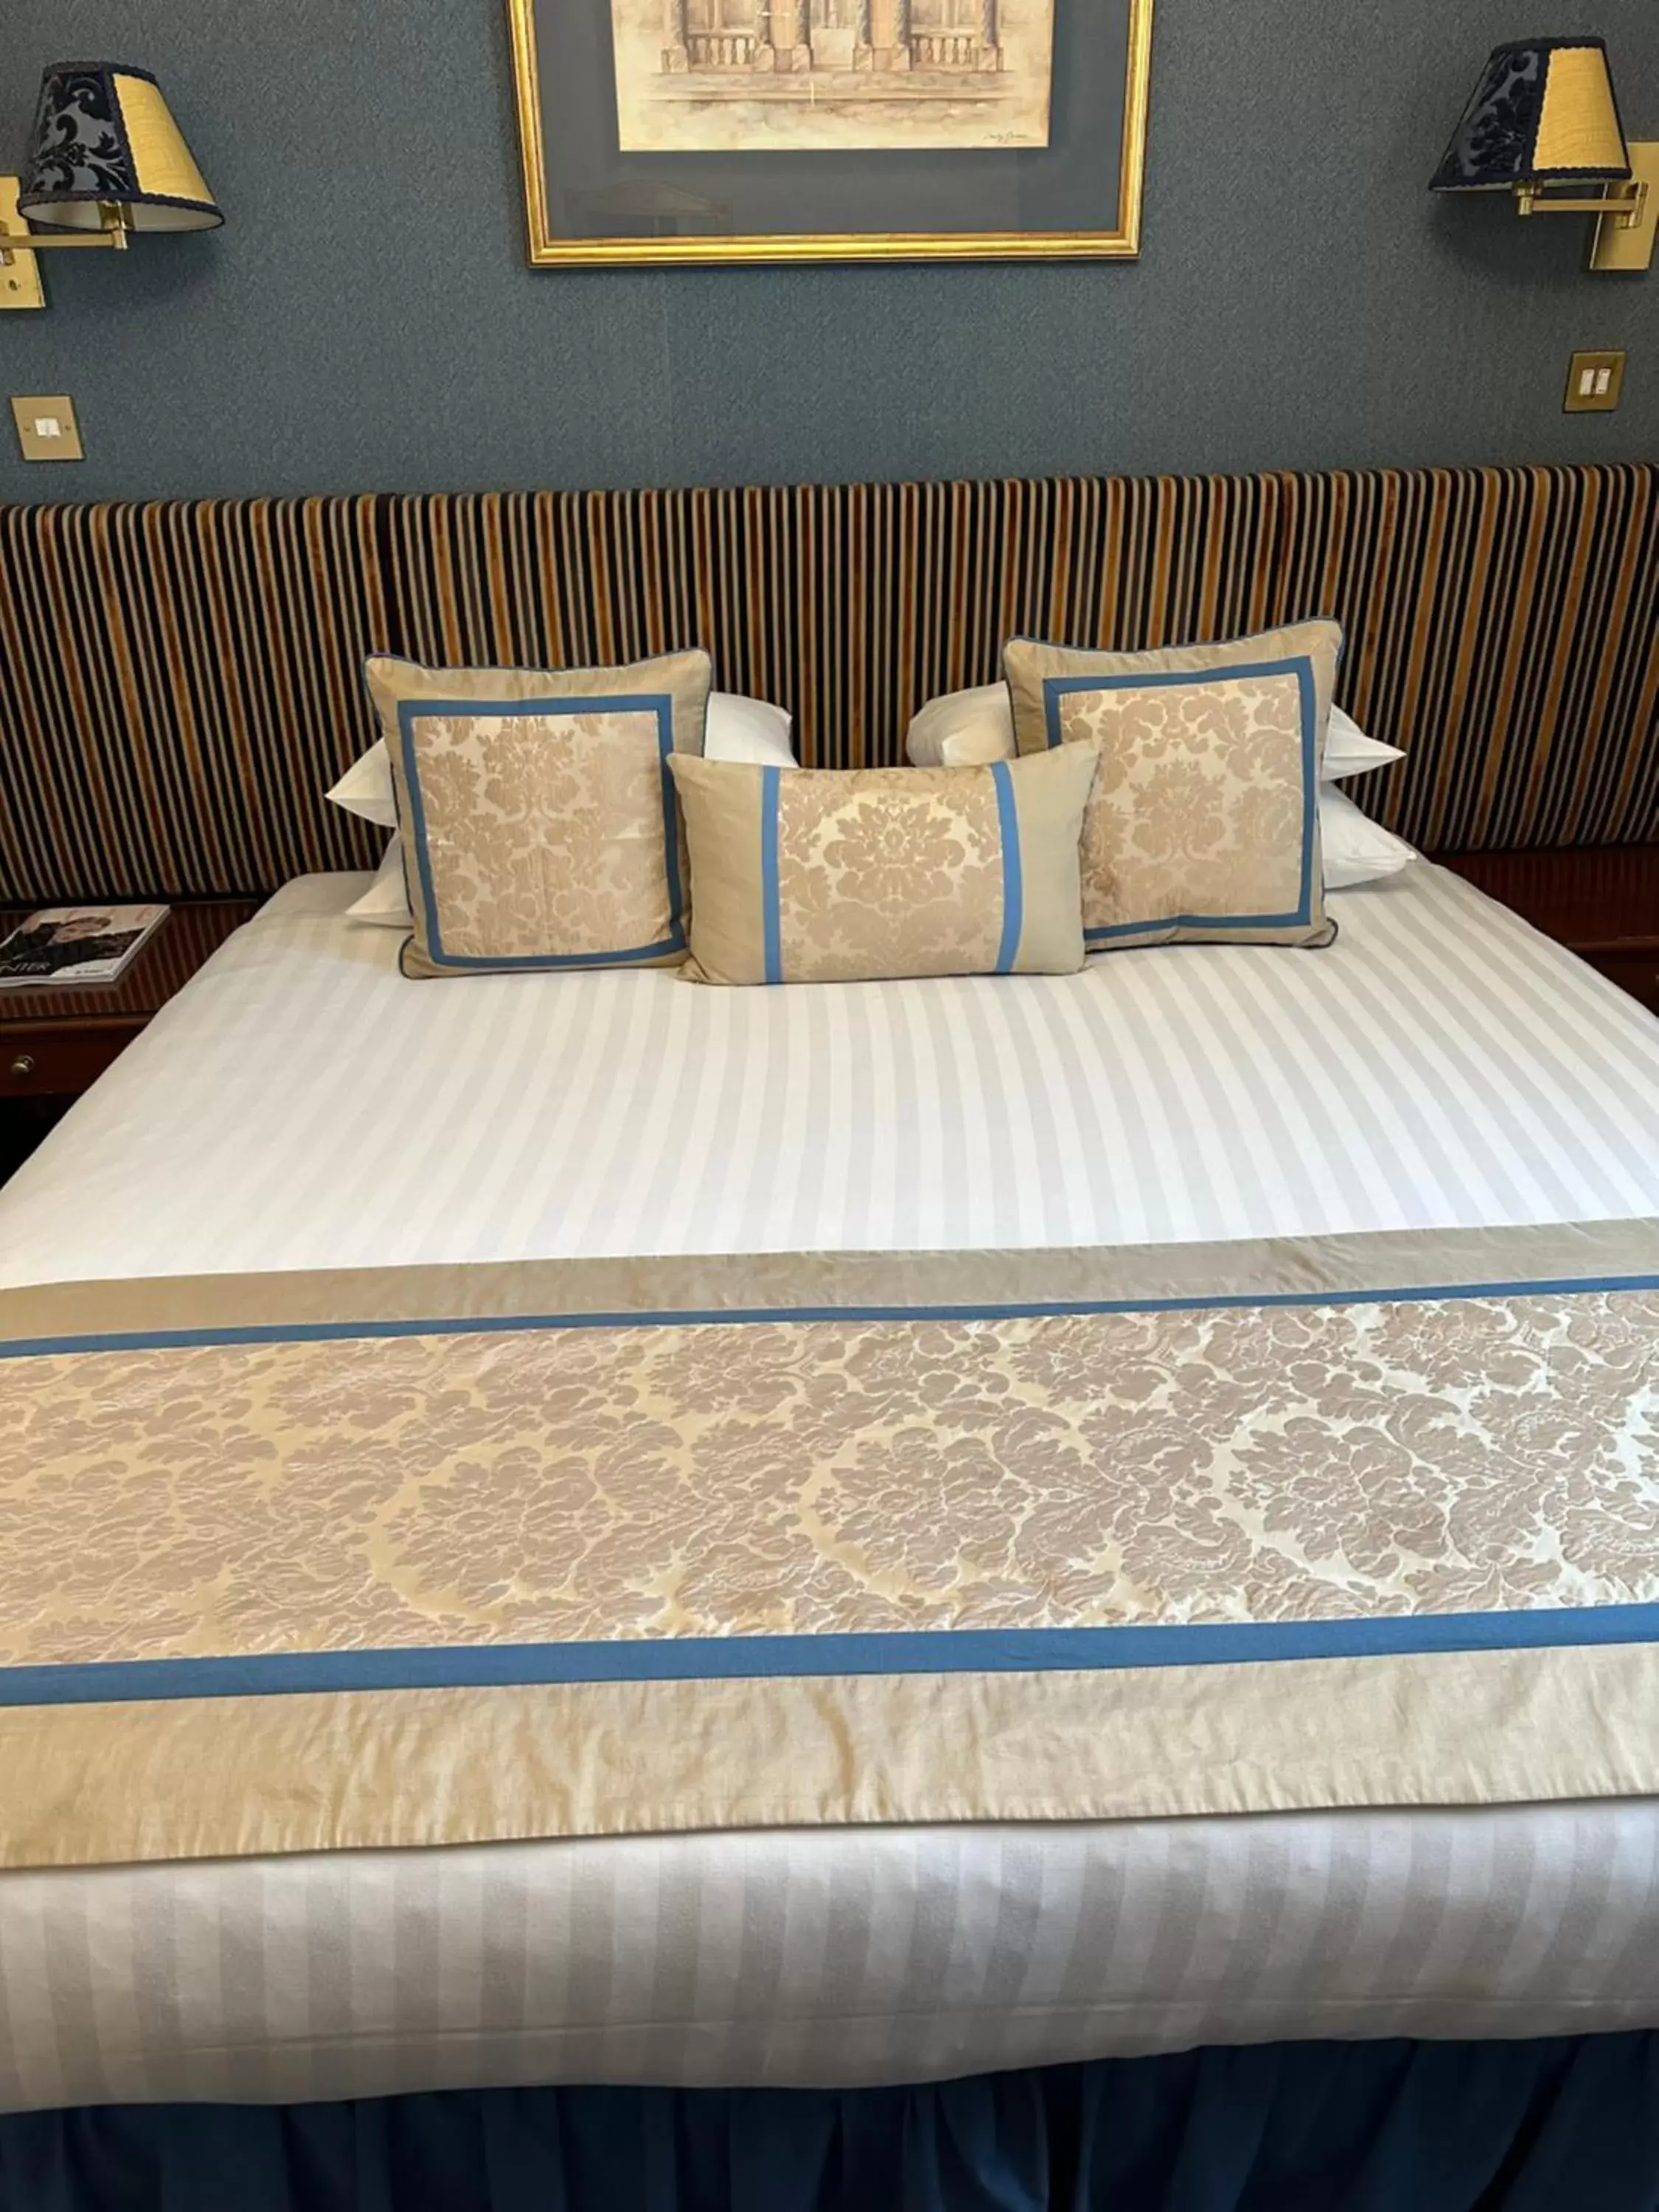 Bed in London Lodge Hotel